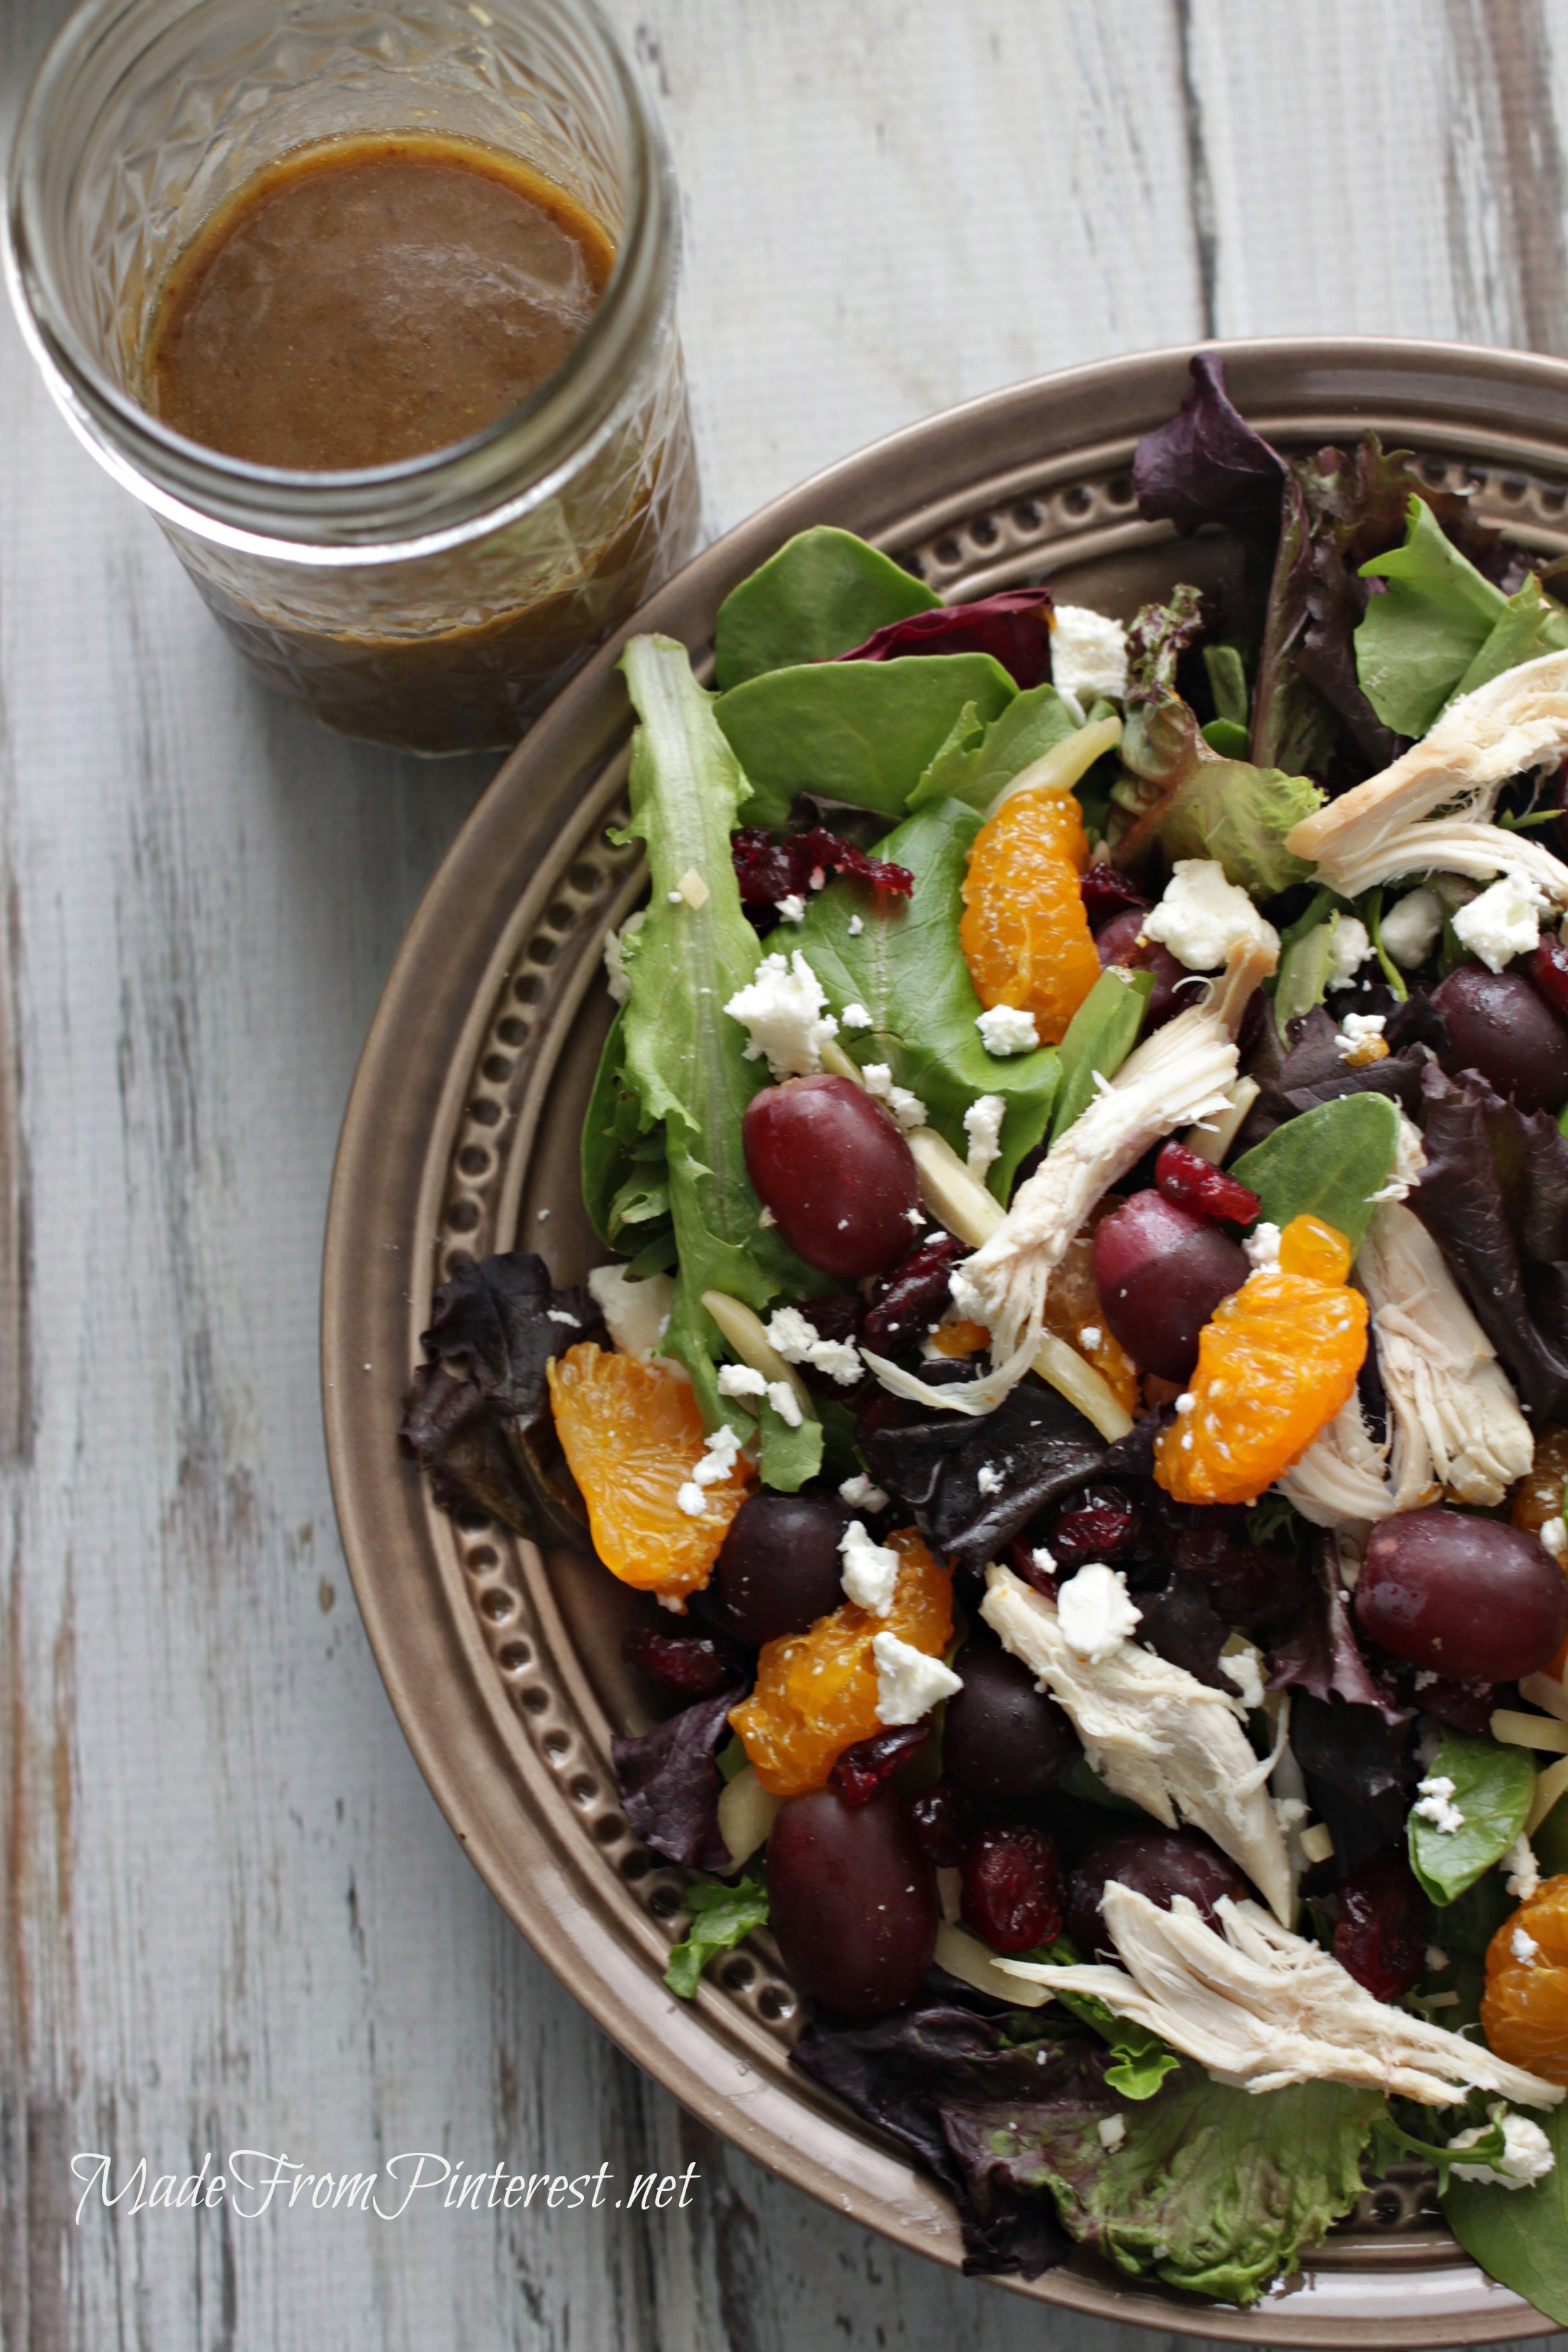 Mediterranean Chicken Salad with Creamy Balsamic Vinaigrette. Perfect blend of flavors and colors!